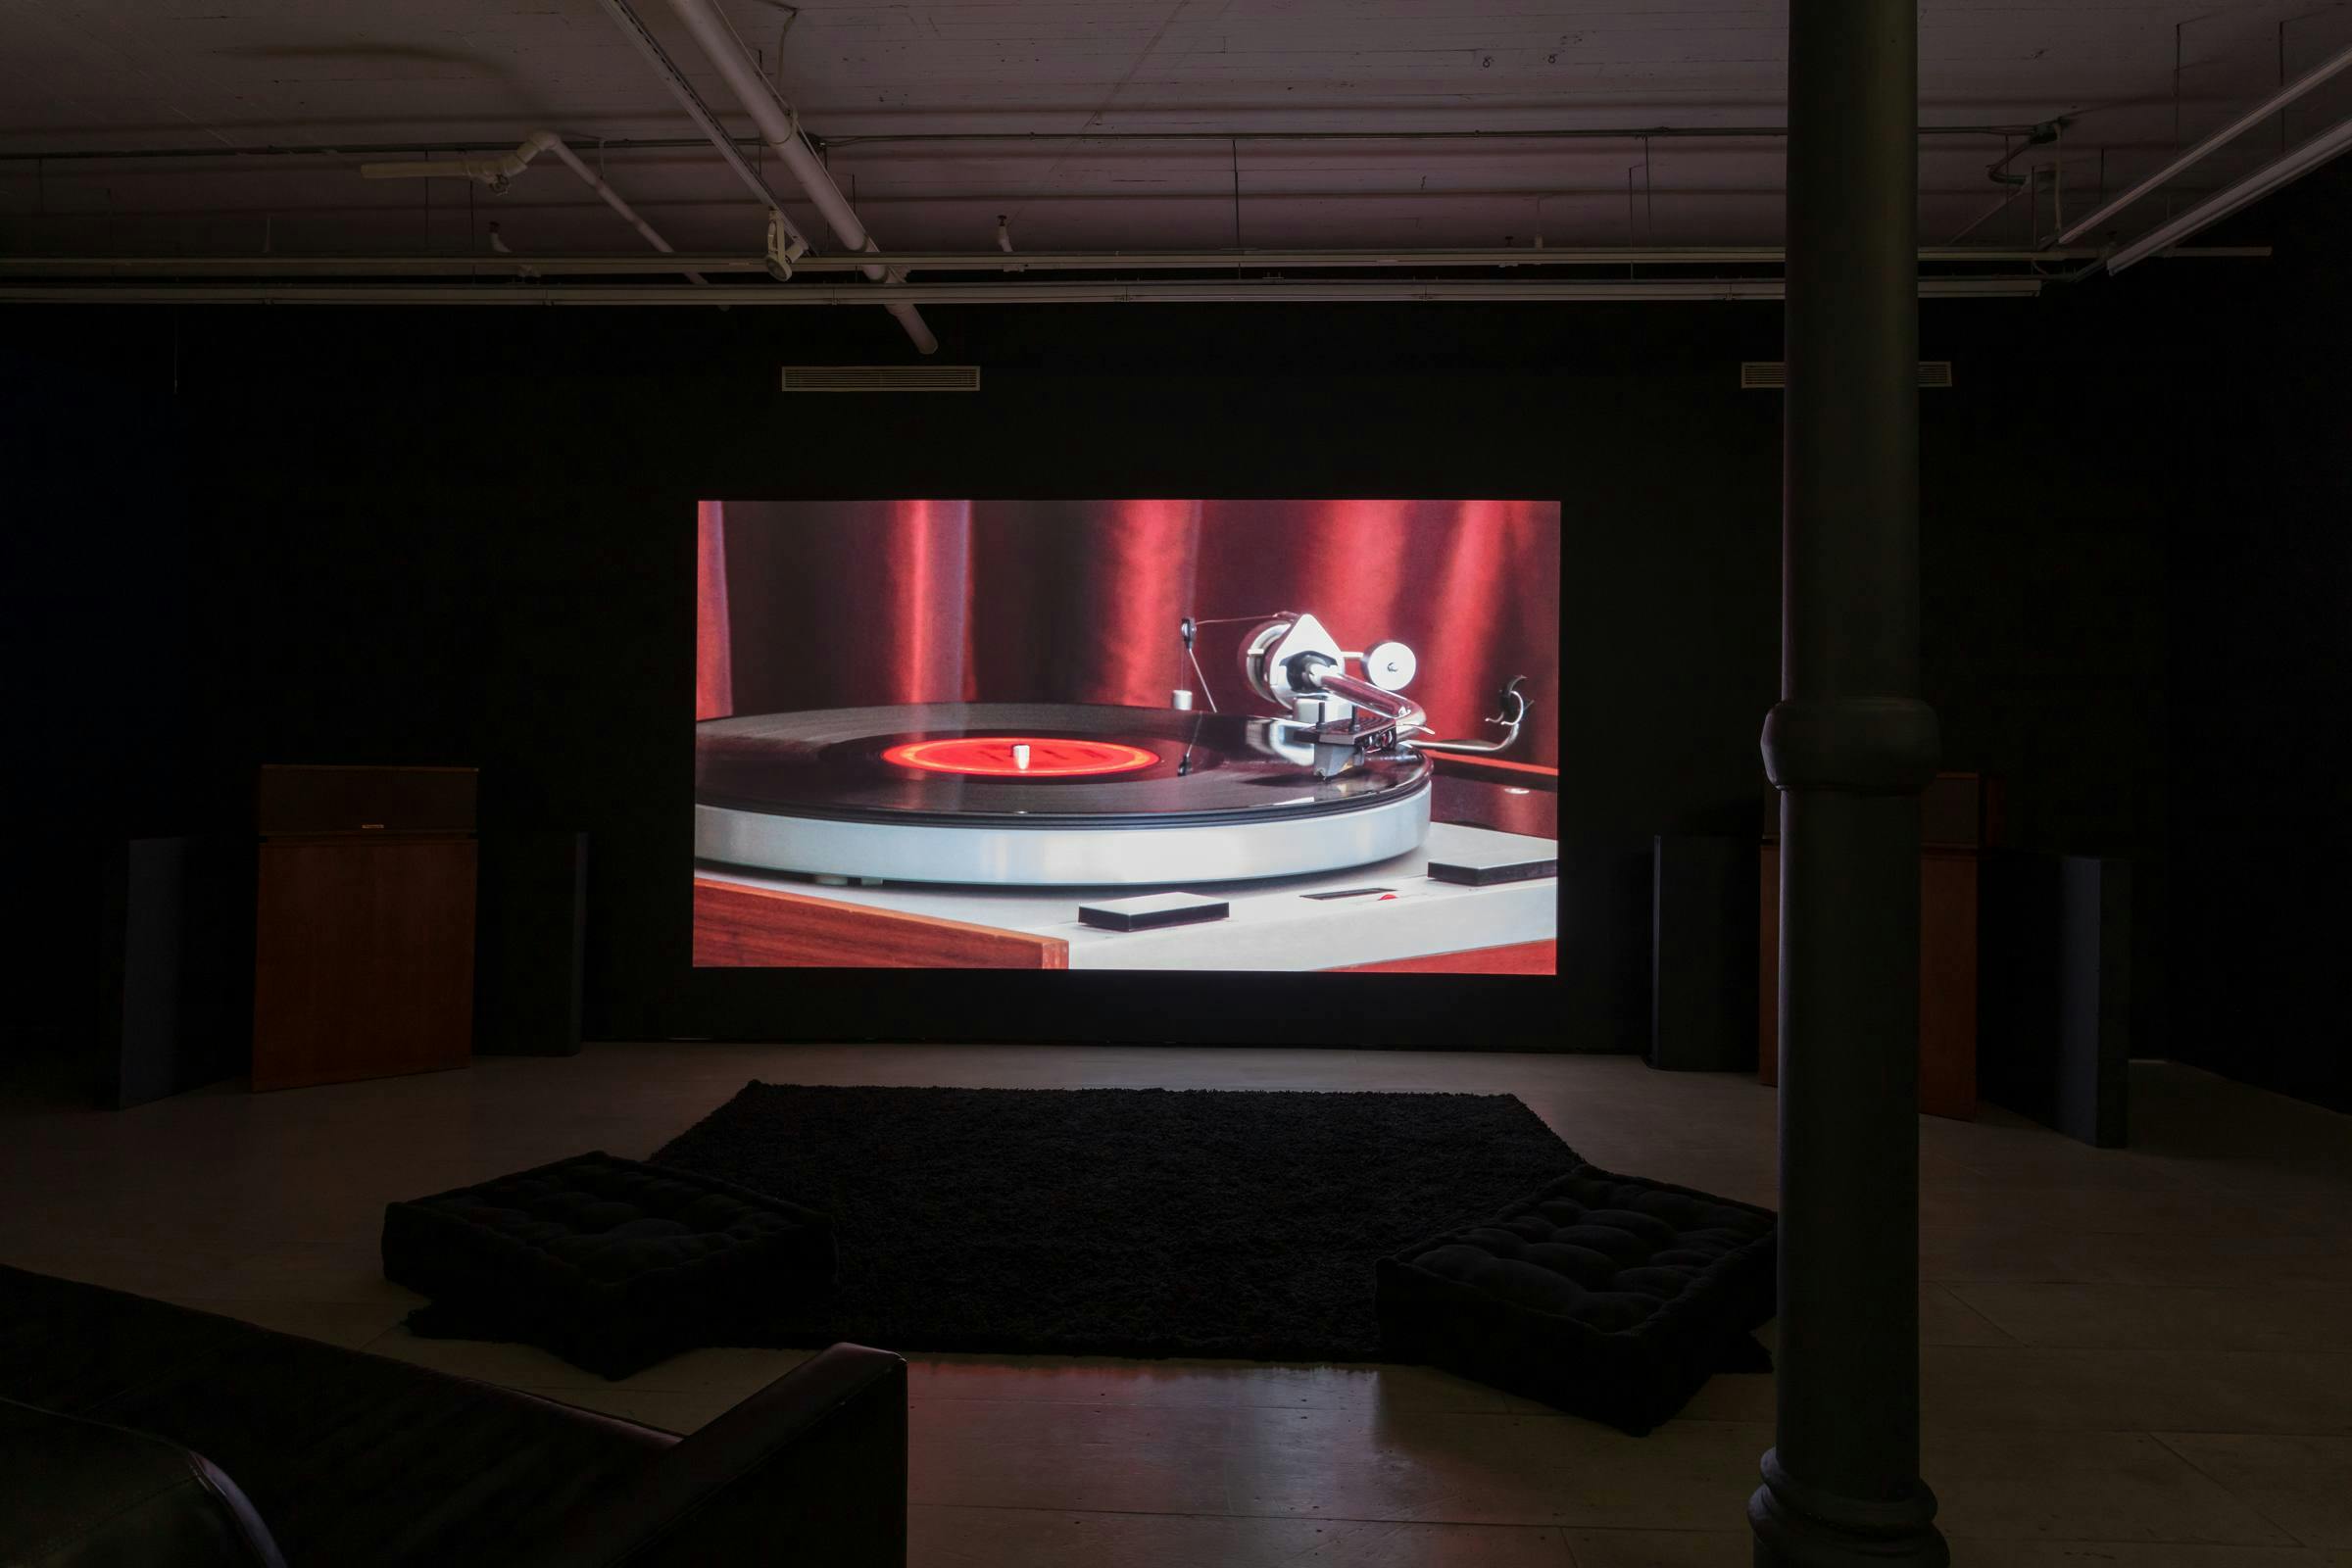 installation view of Last Night projected in a darkened gallery space. There are sofas in front of the projection and a concrete column is visible in the foreground